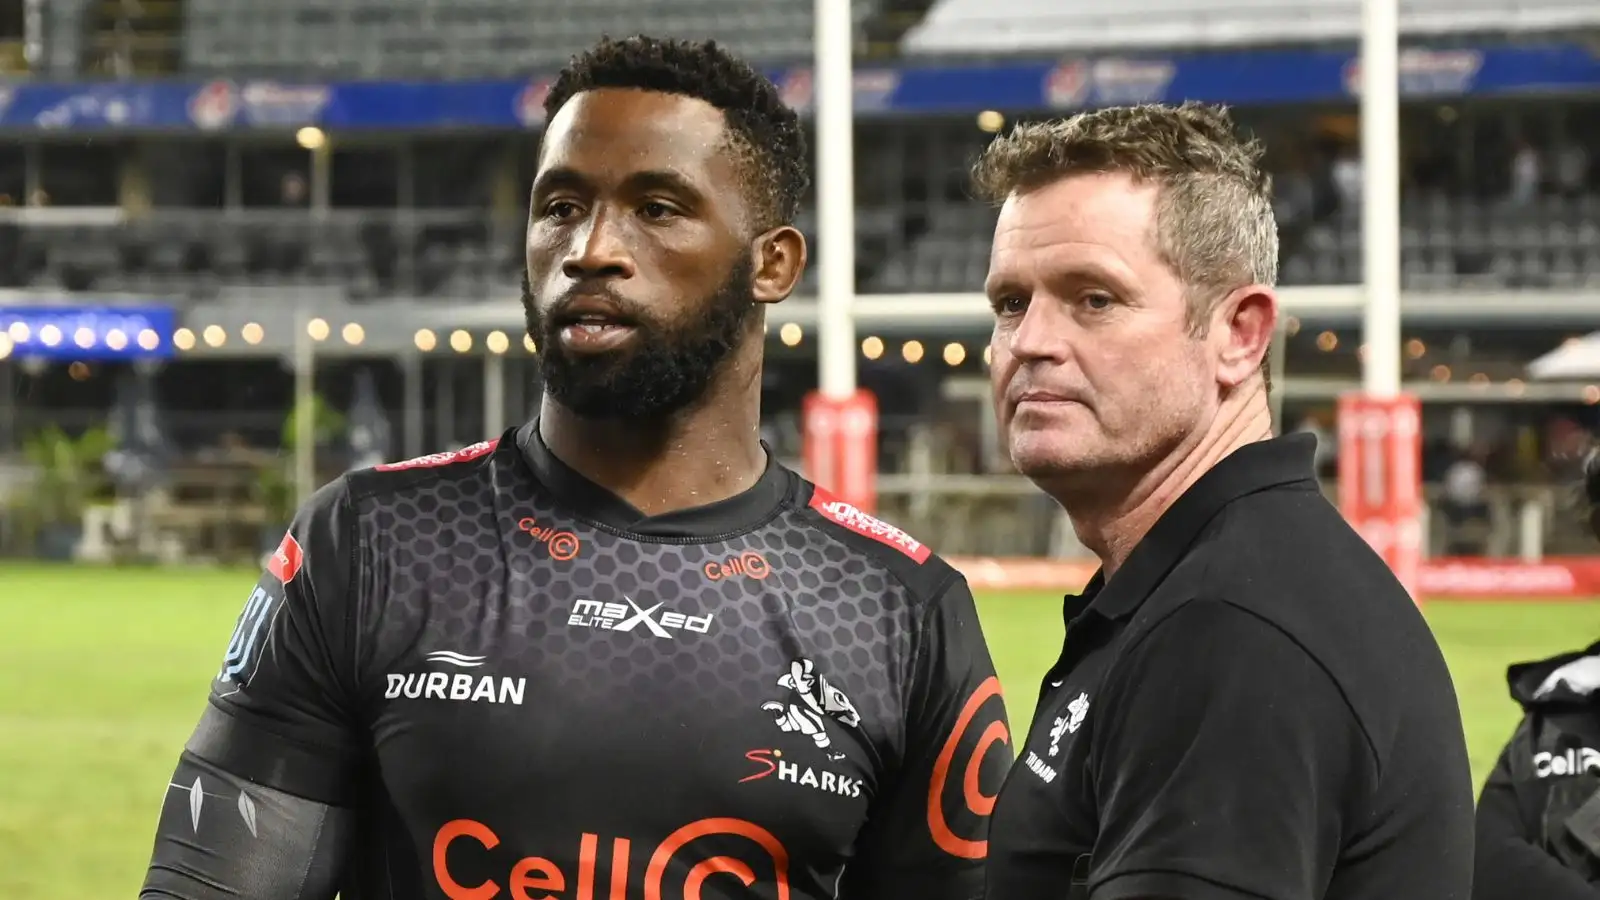 Siya Kolisi, Captain of the Sharks and sharks coach Sean Everitt during the United Rugby Championship 2021/22 match between the Sharks and Edinburgh held at Kings Park in Durban on 26 March 2022